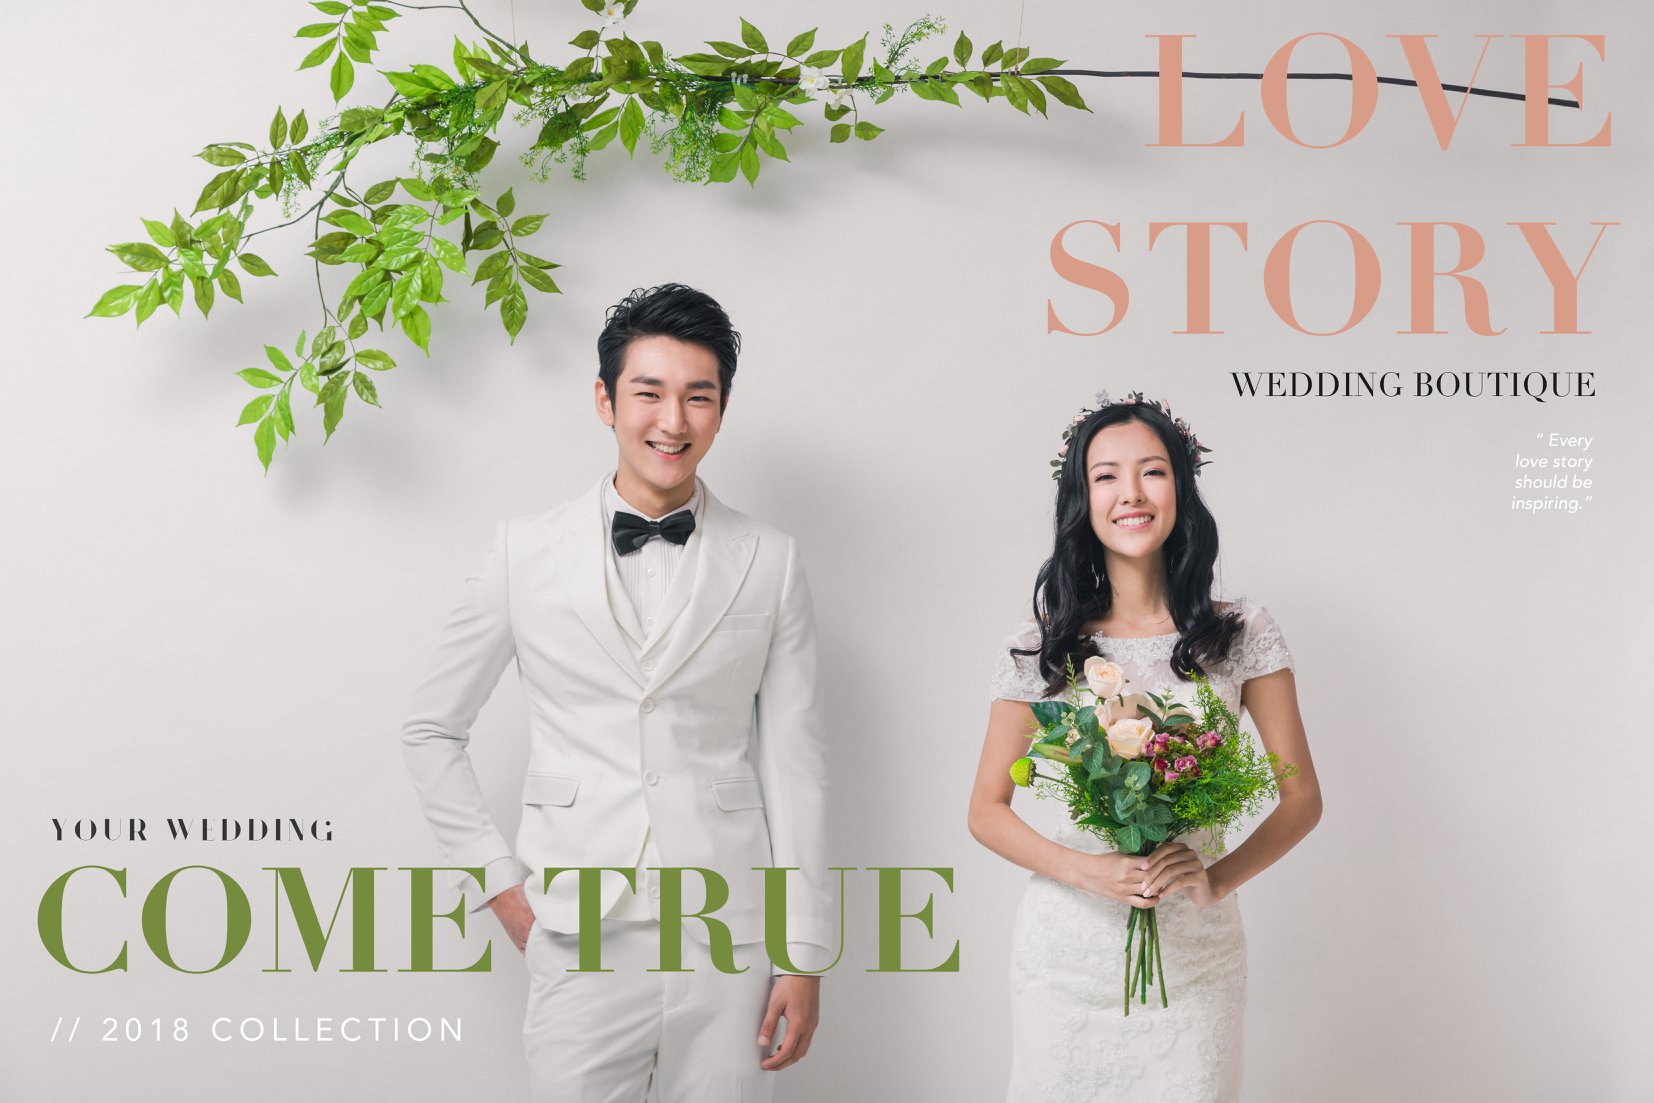 LOVE STORY WEDDING BOUTIQUE